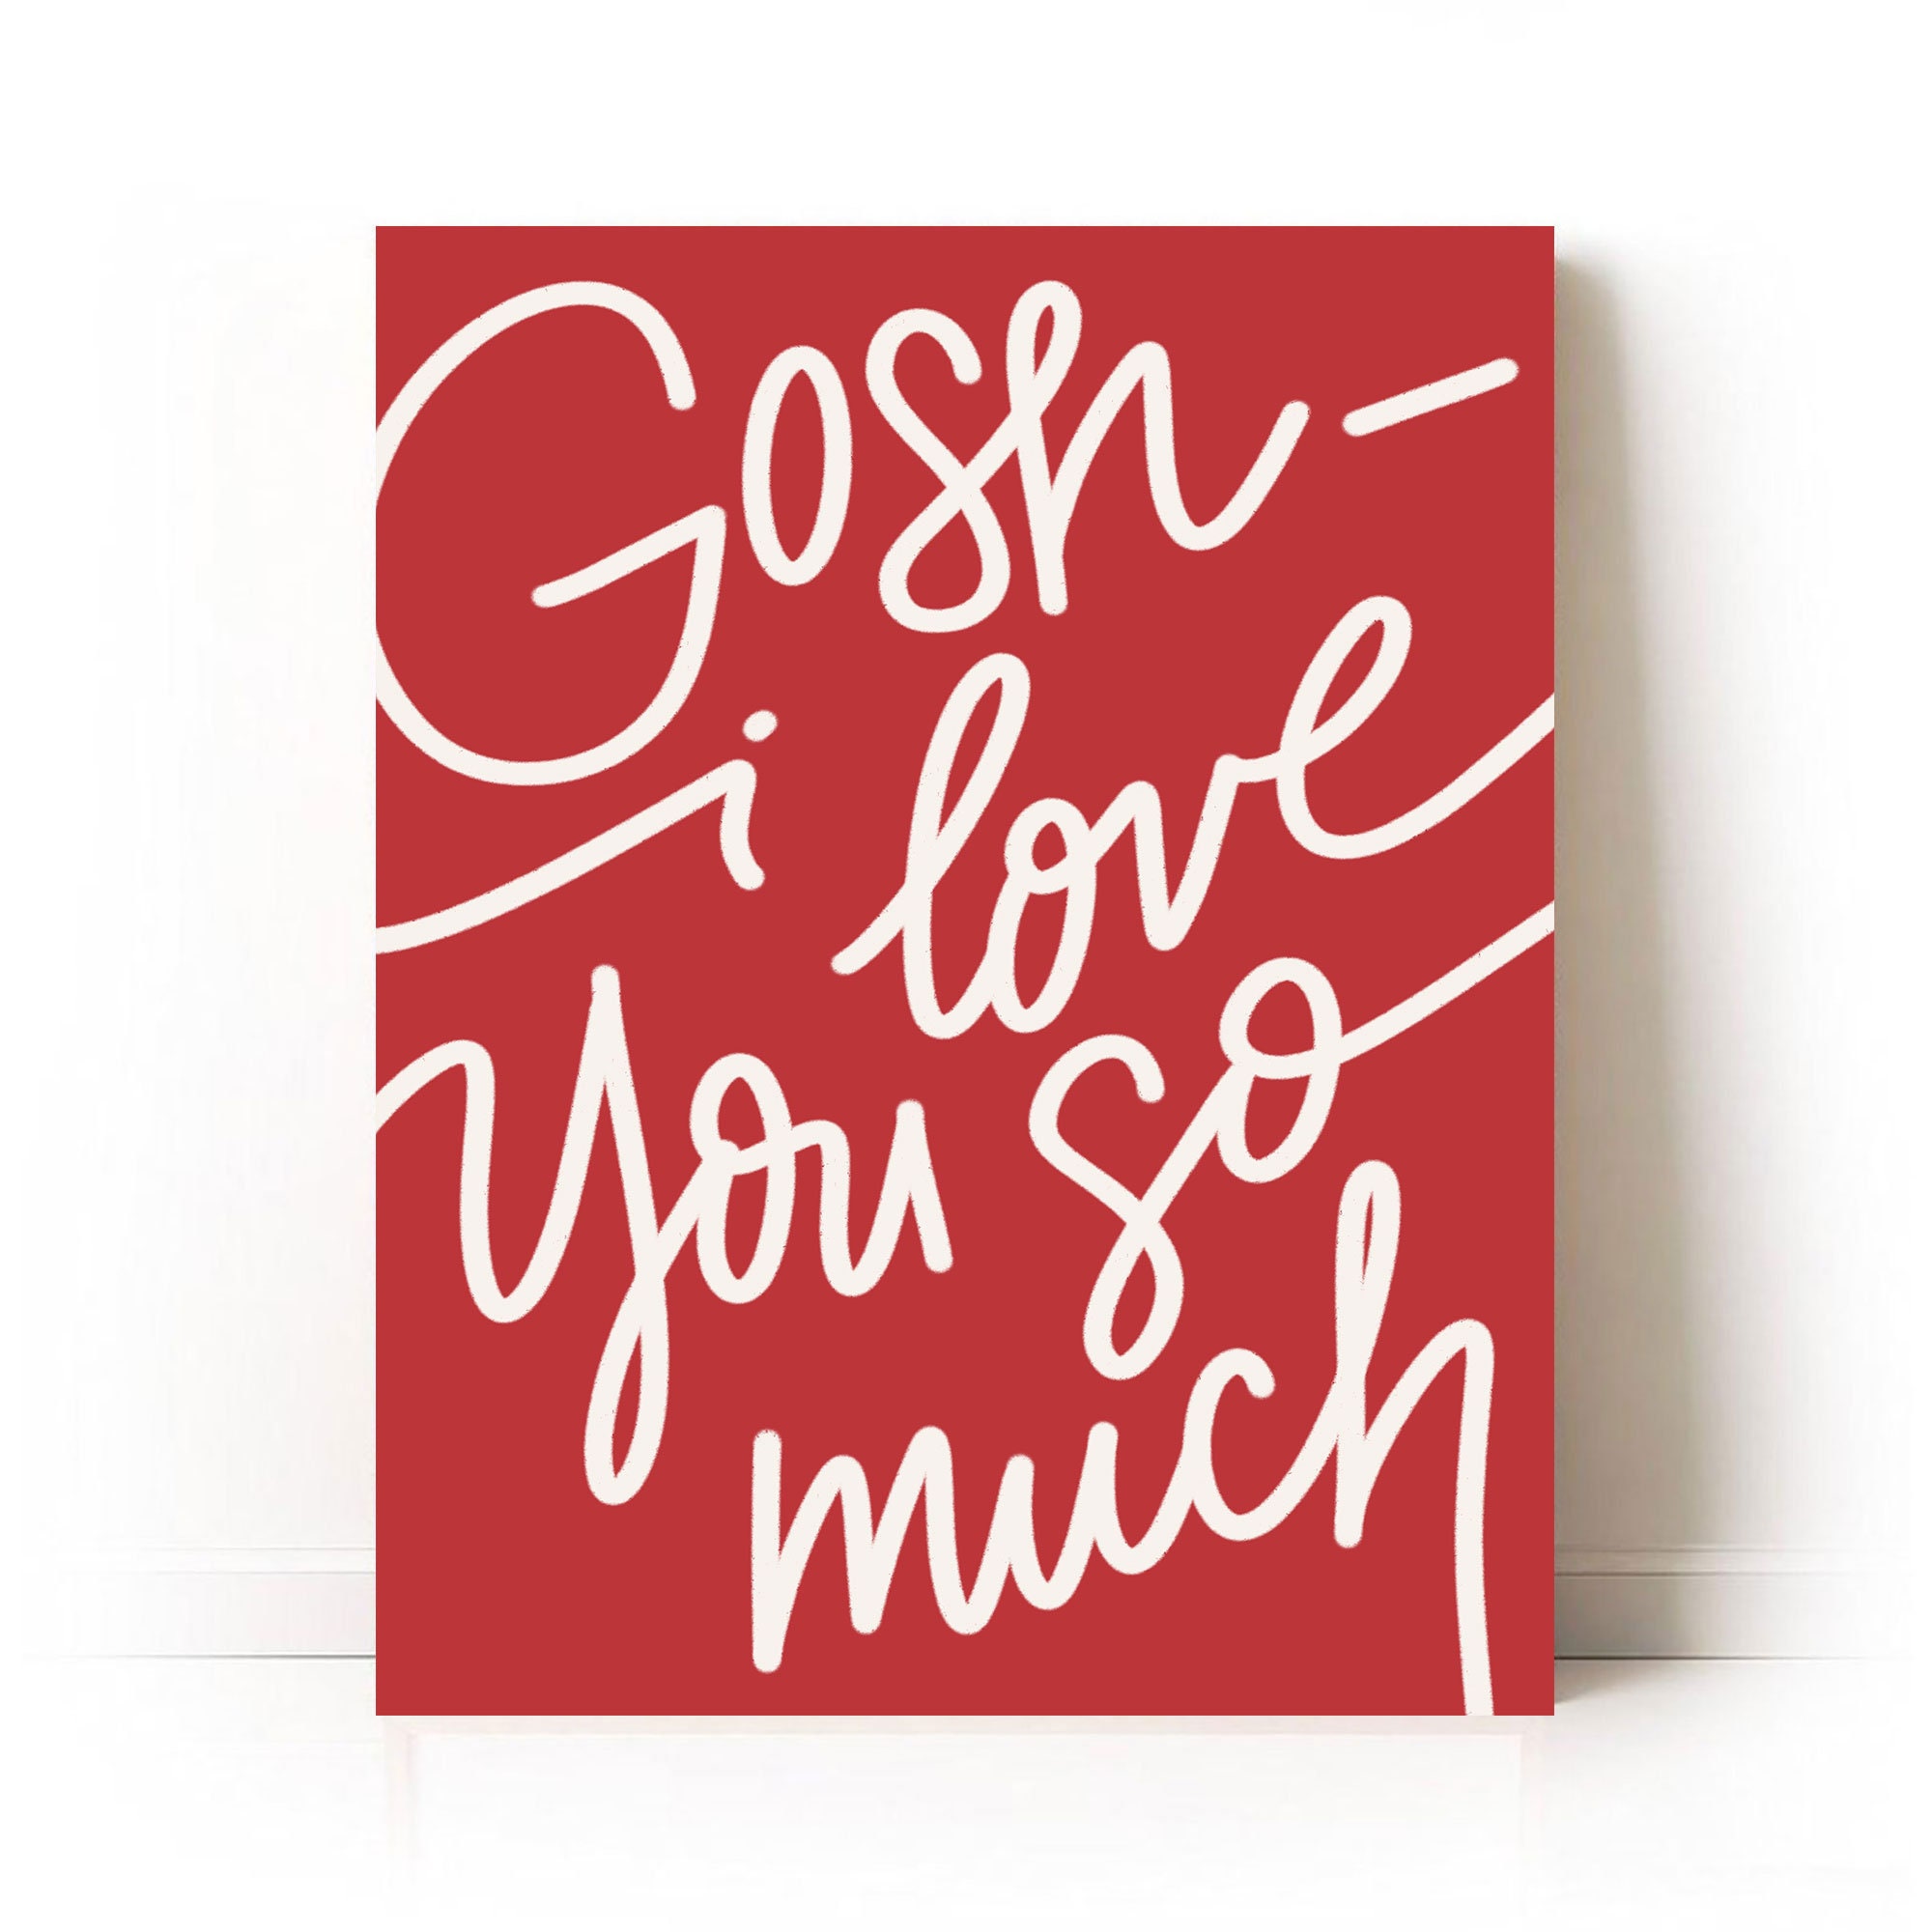 gosh darn it ! love you too much! - adorable cursed emoji Poster for Sale  by Blue Pencil